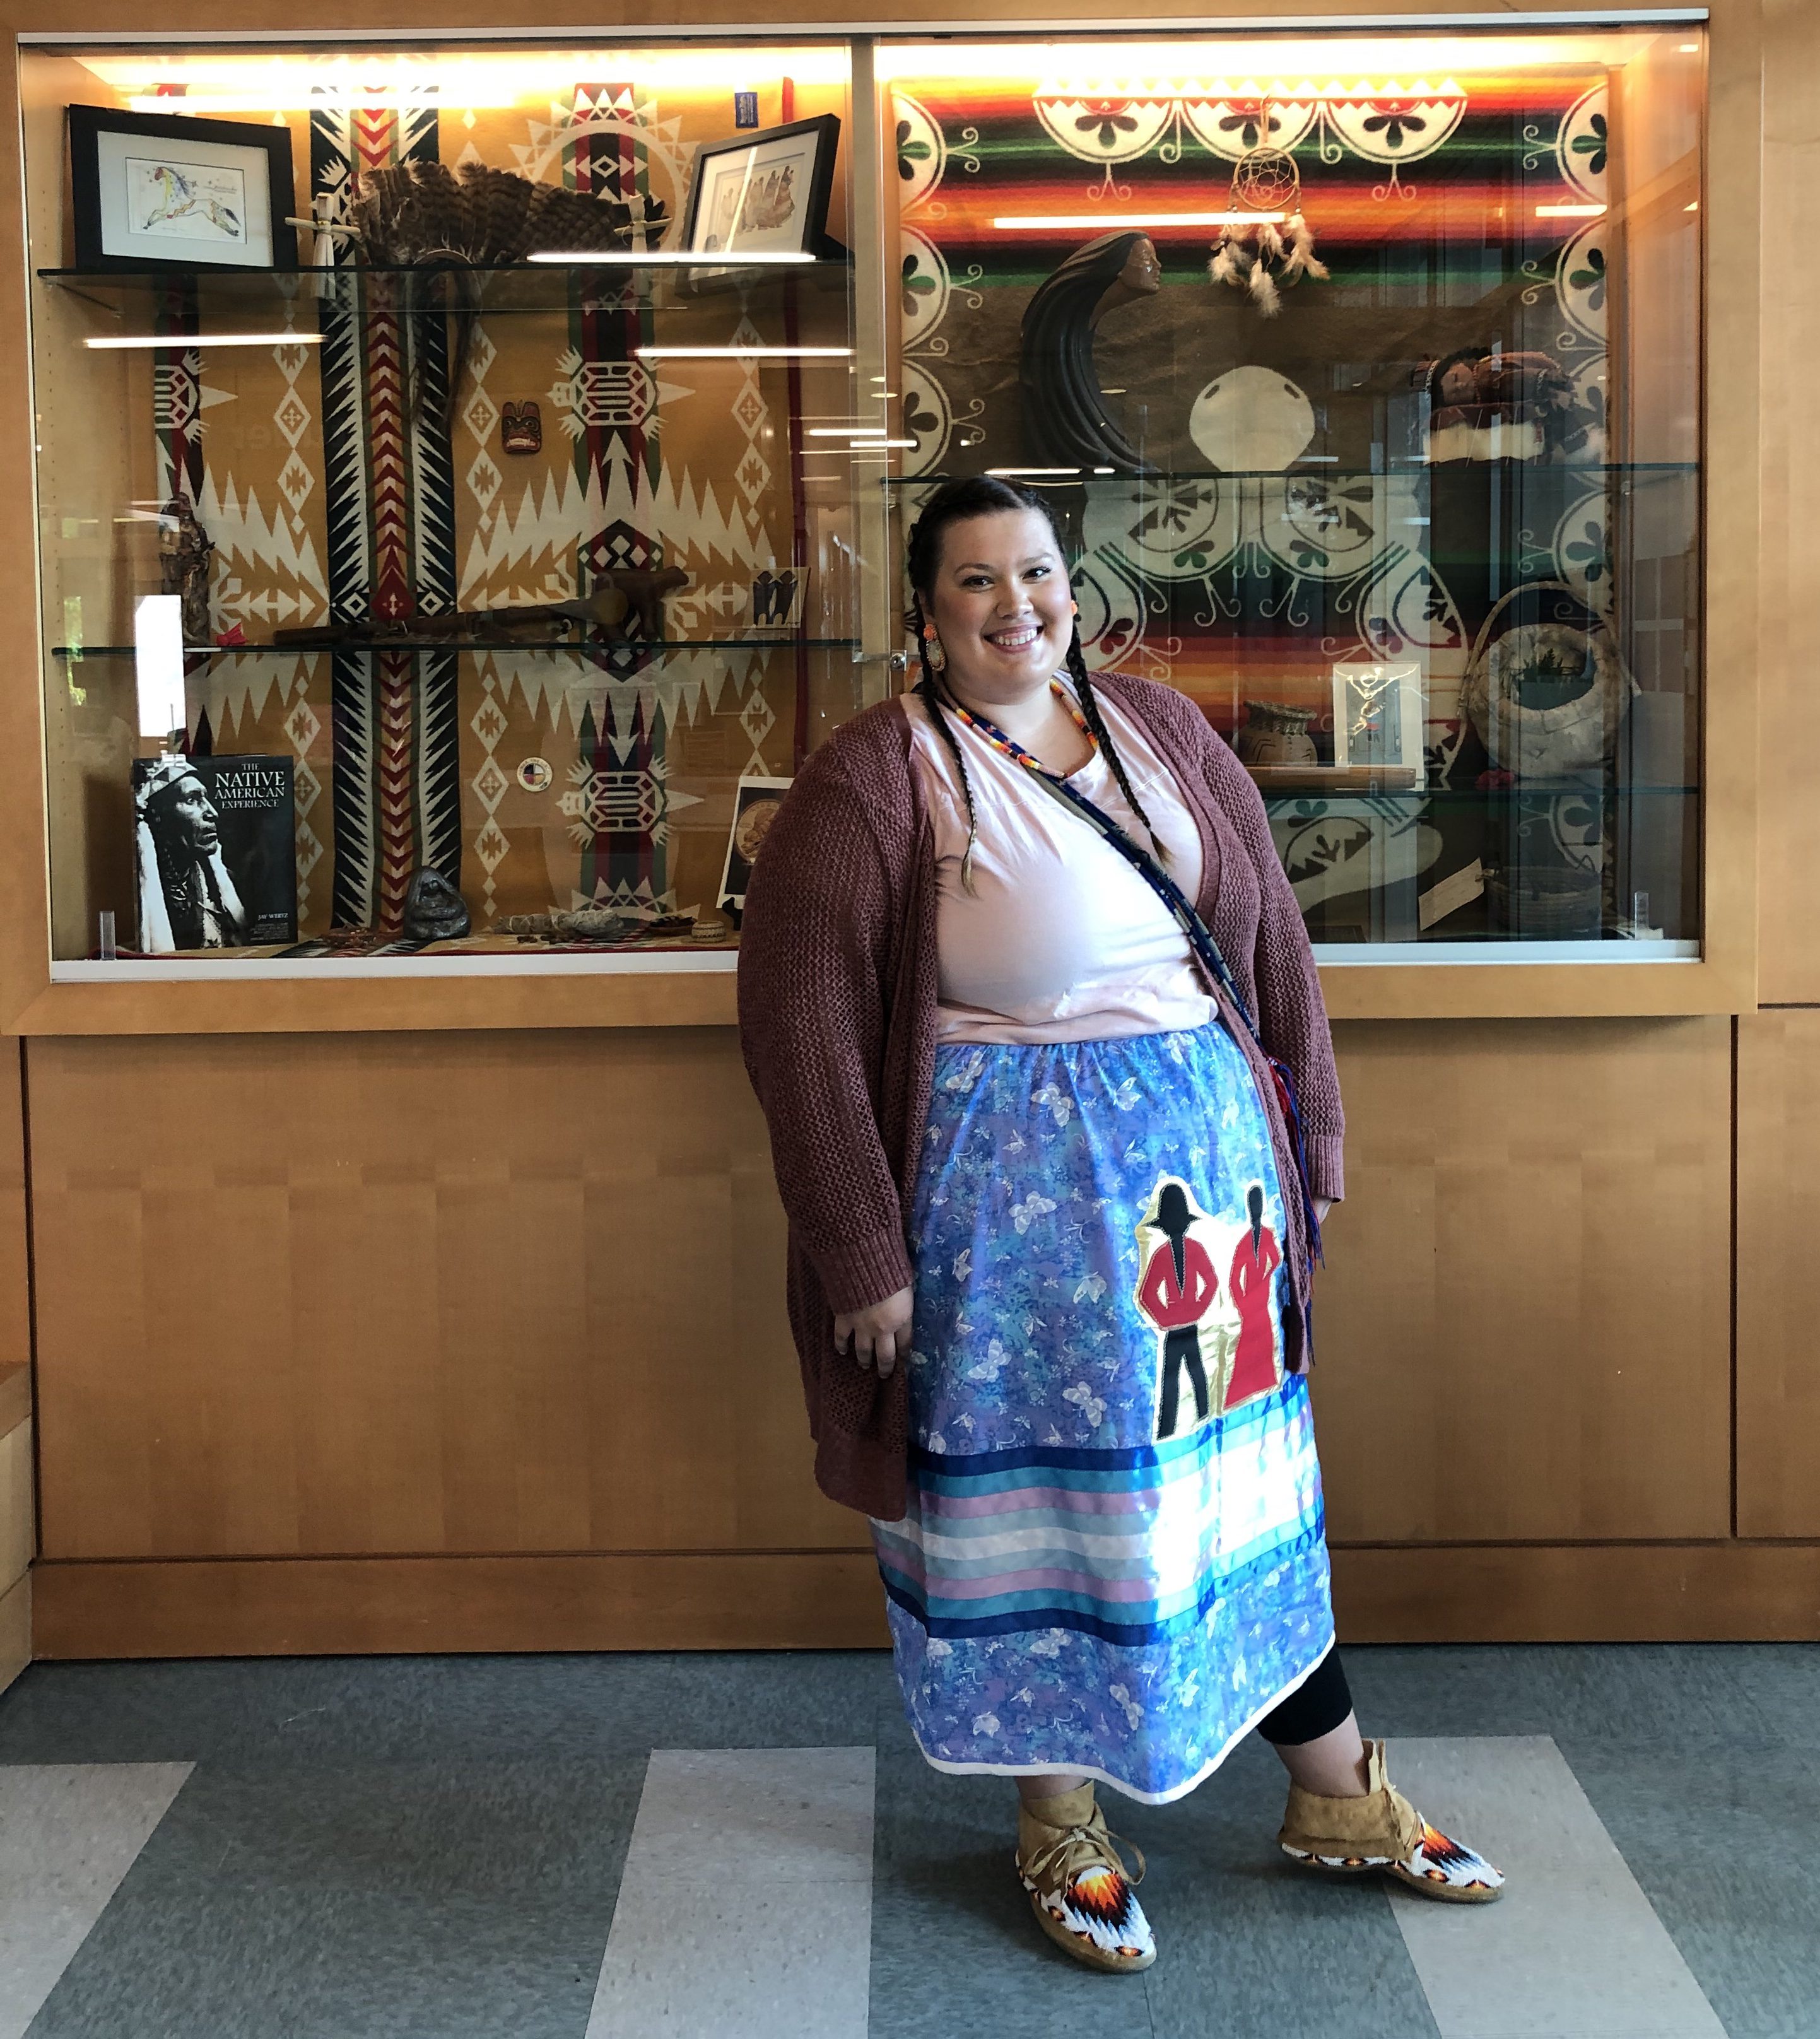 This shows a smiling Monique Lewis, Indigenous hairstylist, standing in front of a showcase filled with Indigenous artifacts.